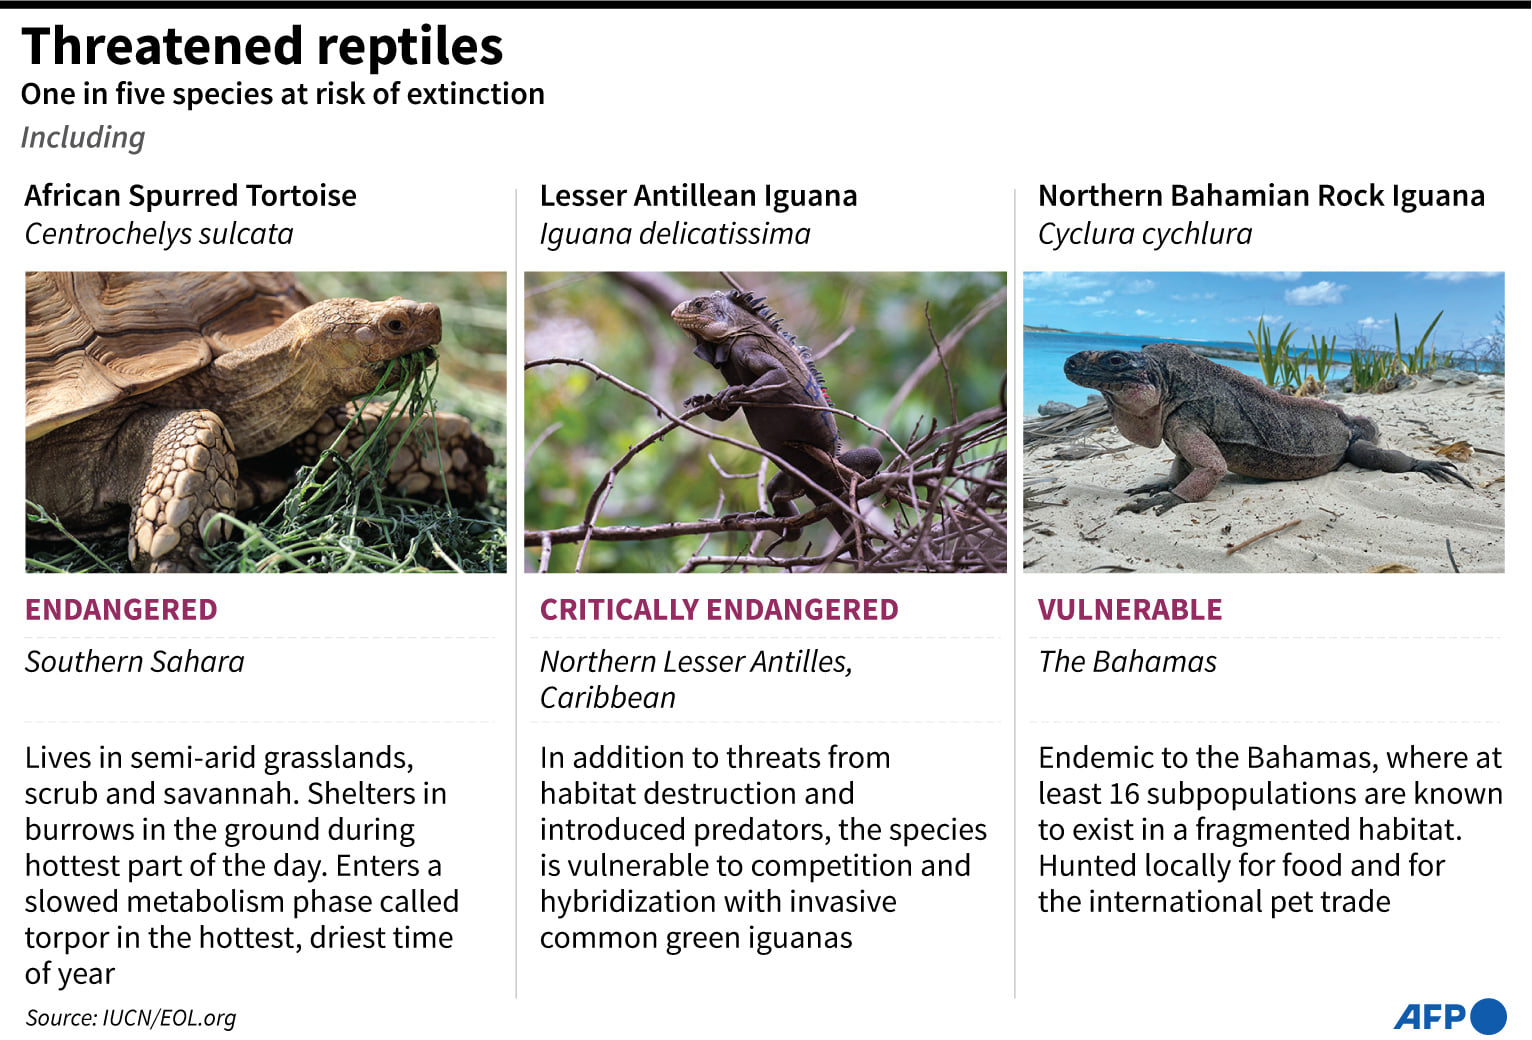 Over 21% of reptile species at risk of extinction | Tuoi Tre News